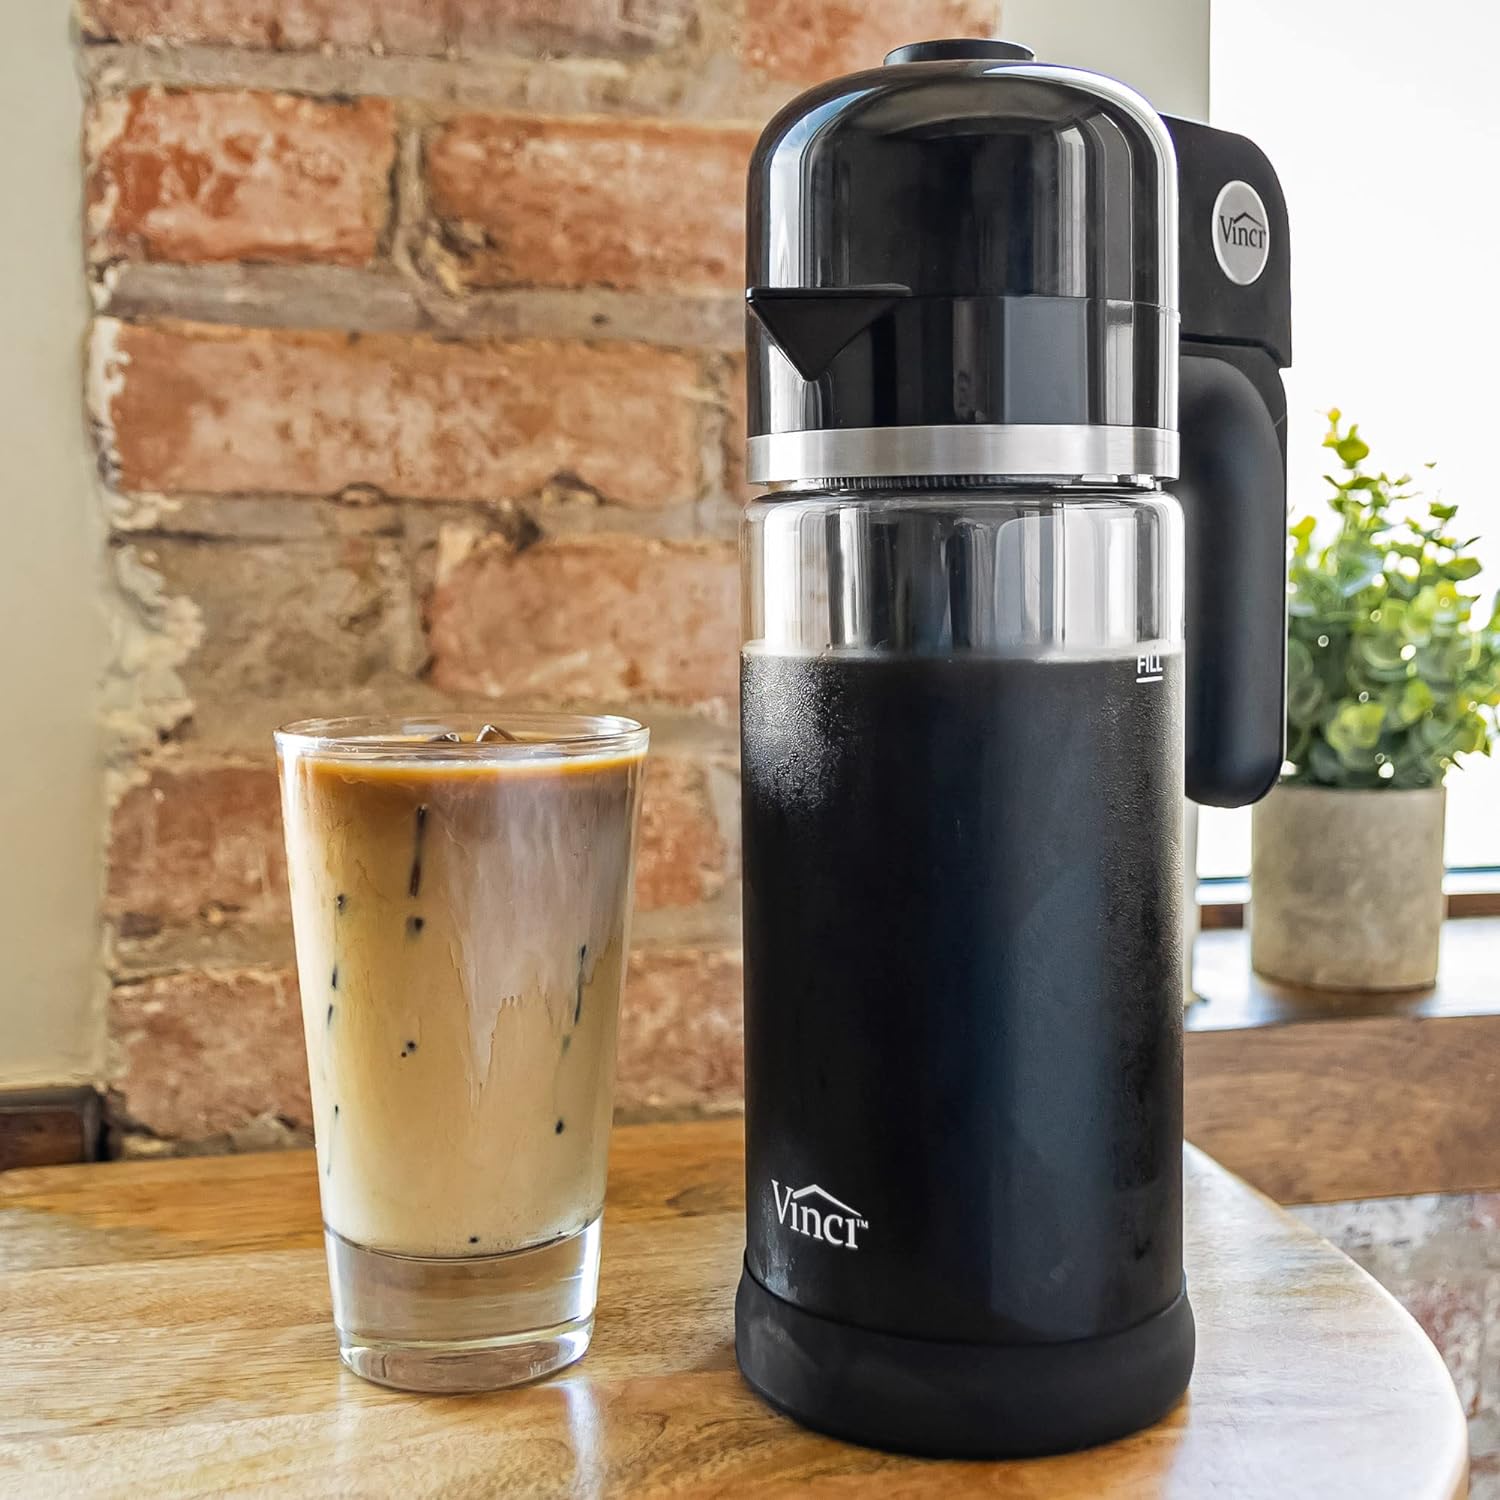 VINCI Express Cold Brew Coffee Maker Review